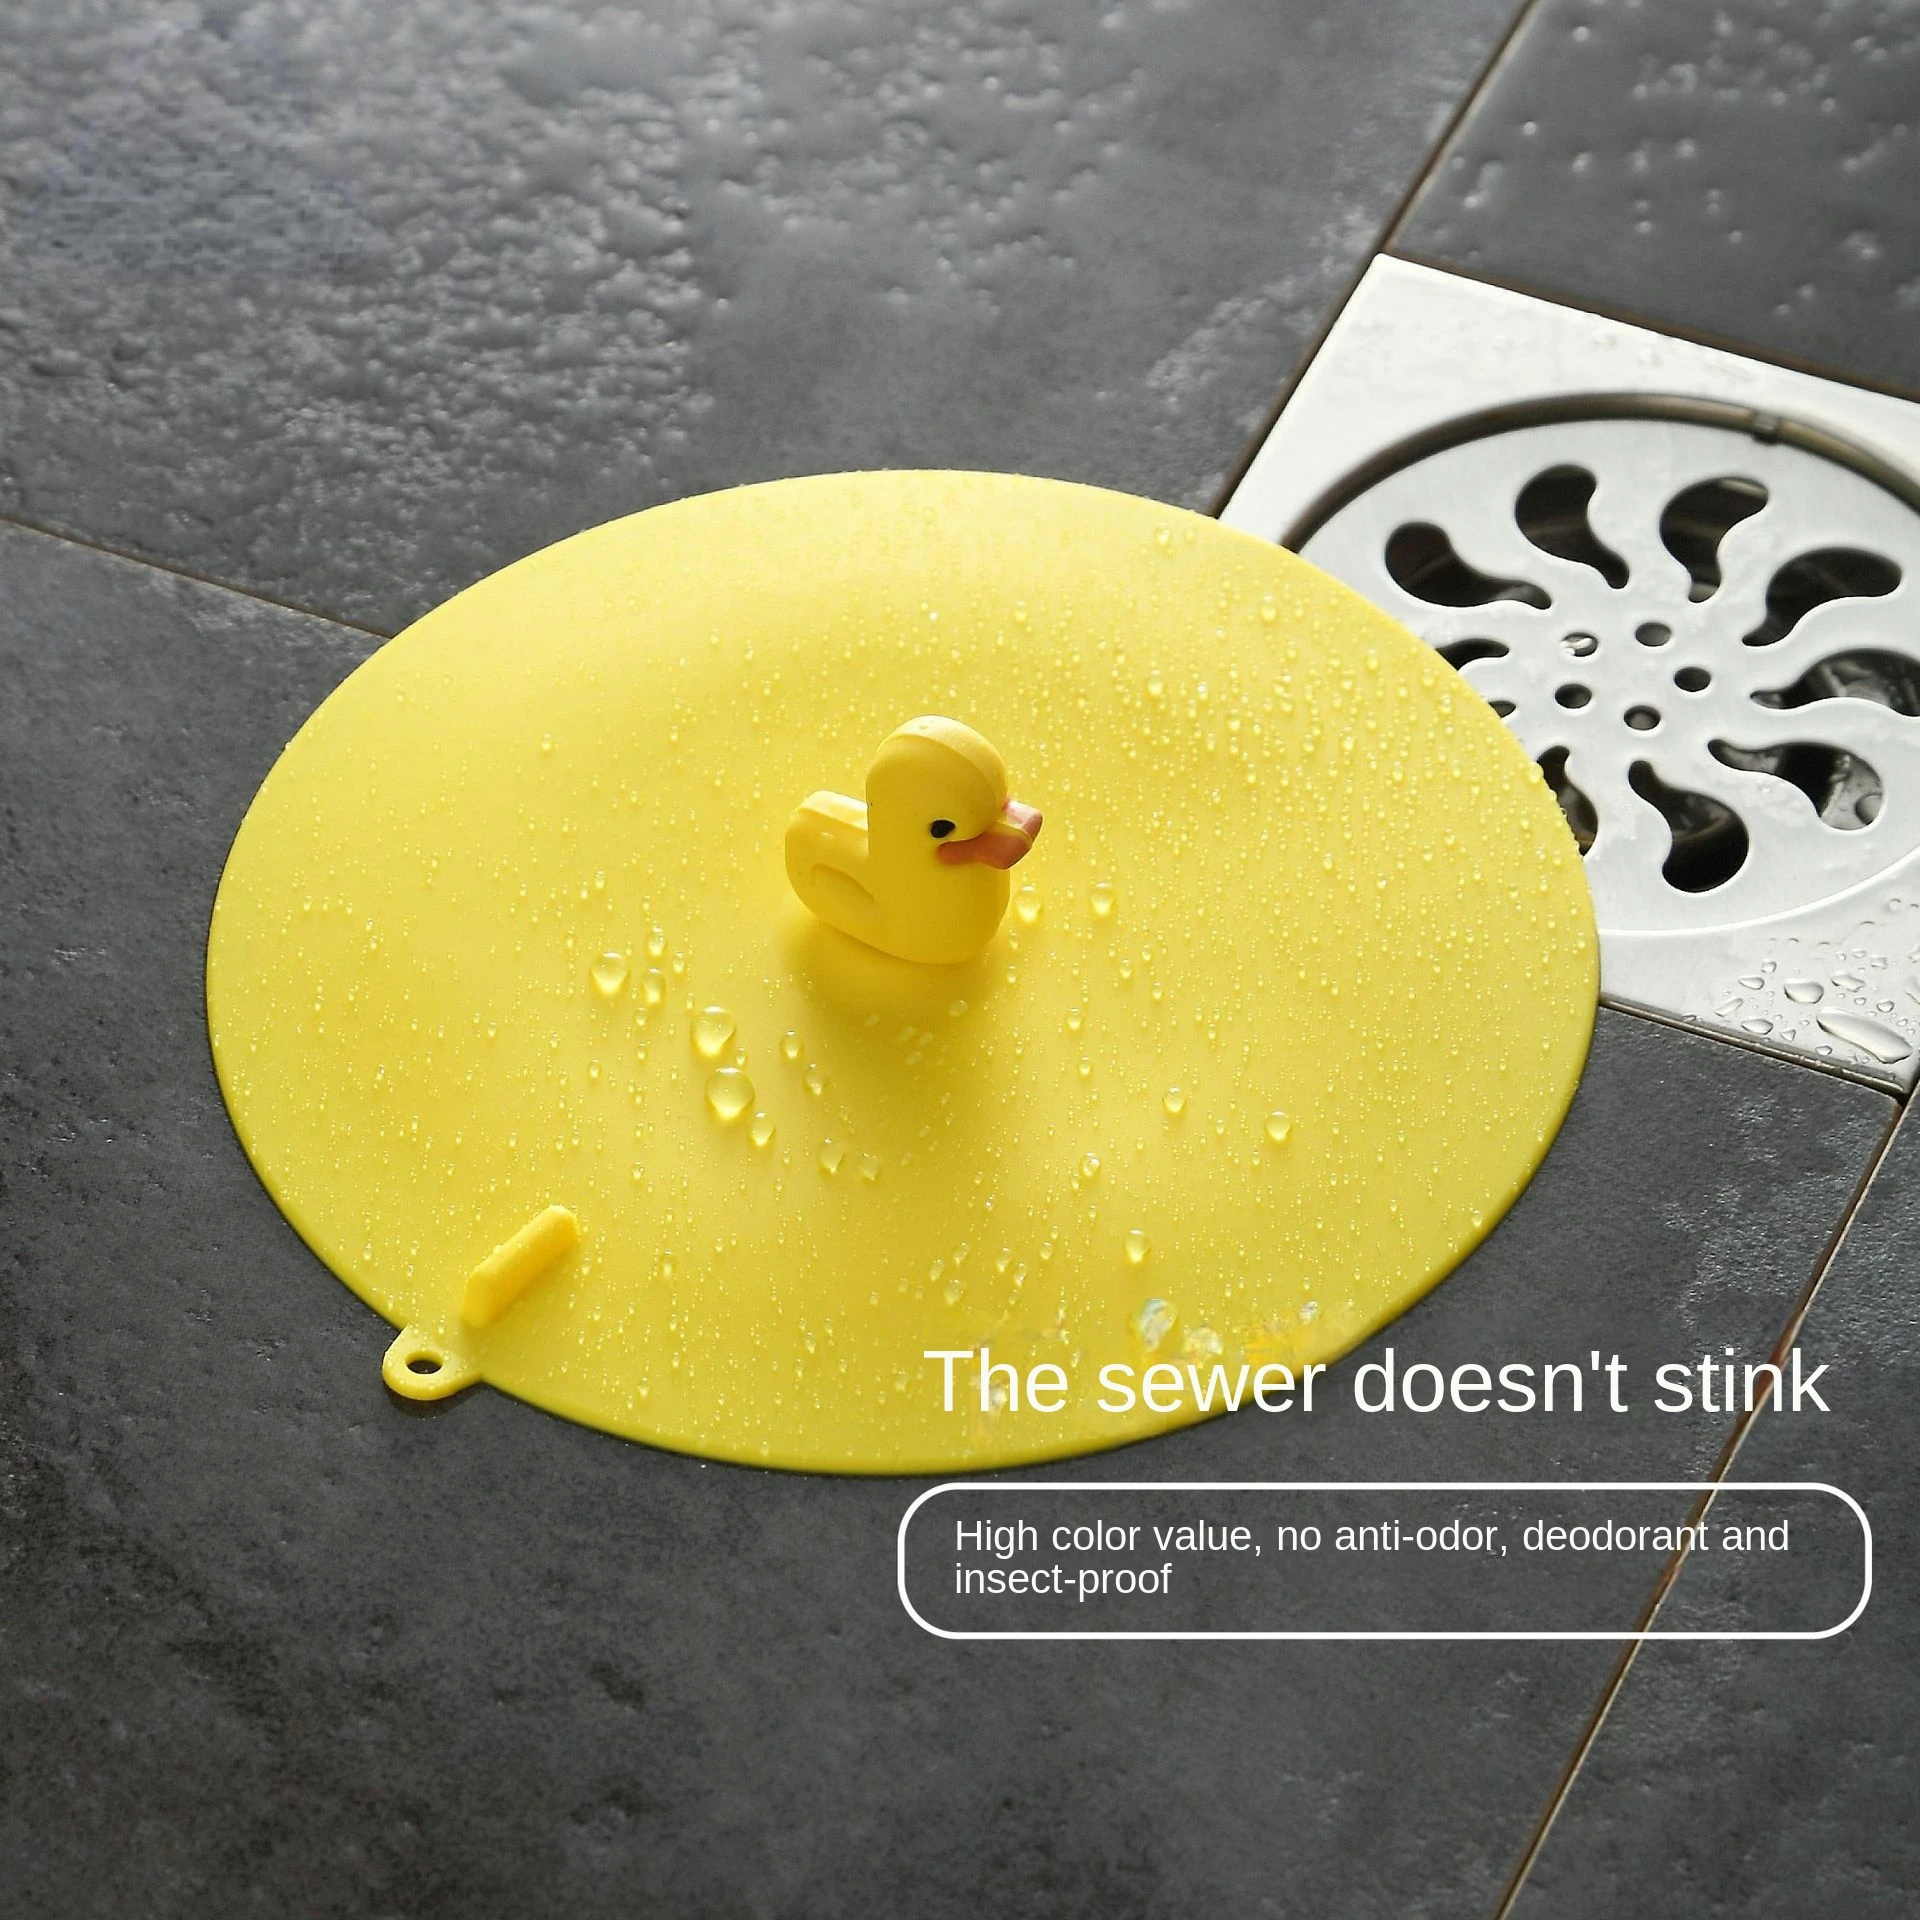 

Silicone floor drain cover toilet anti-odor and deodorizing artifact pad toilet kitchen sink cover sewer deodorizer